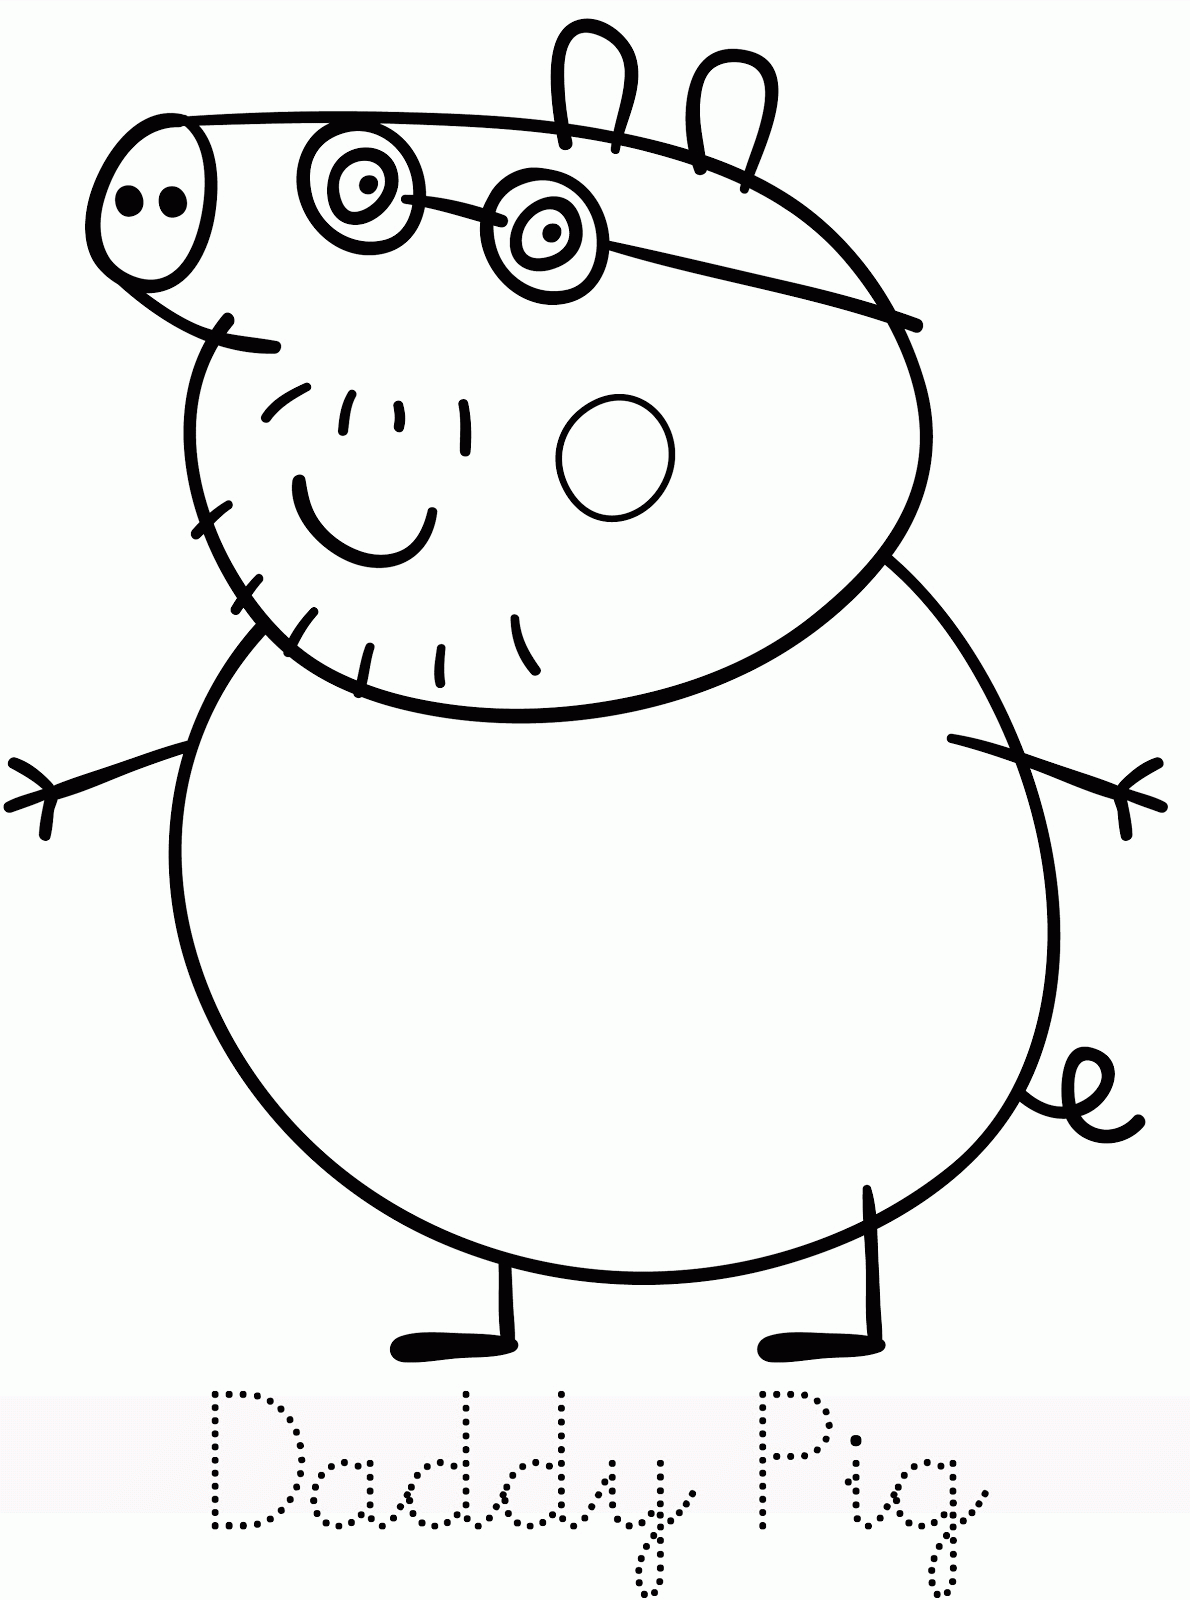 16 Pics of Peppa Pig Colouring Coloring Page - Peppa Pig George ...